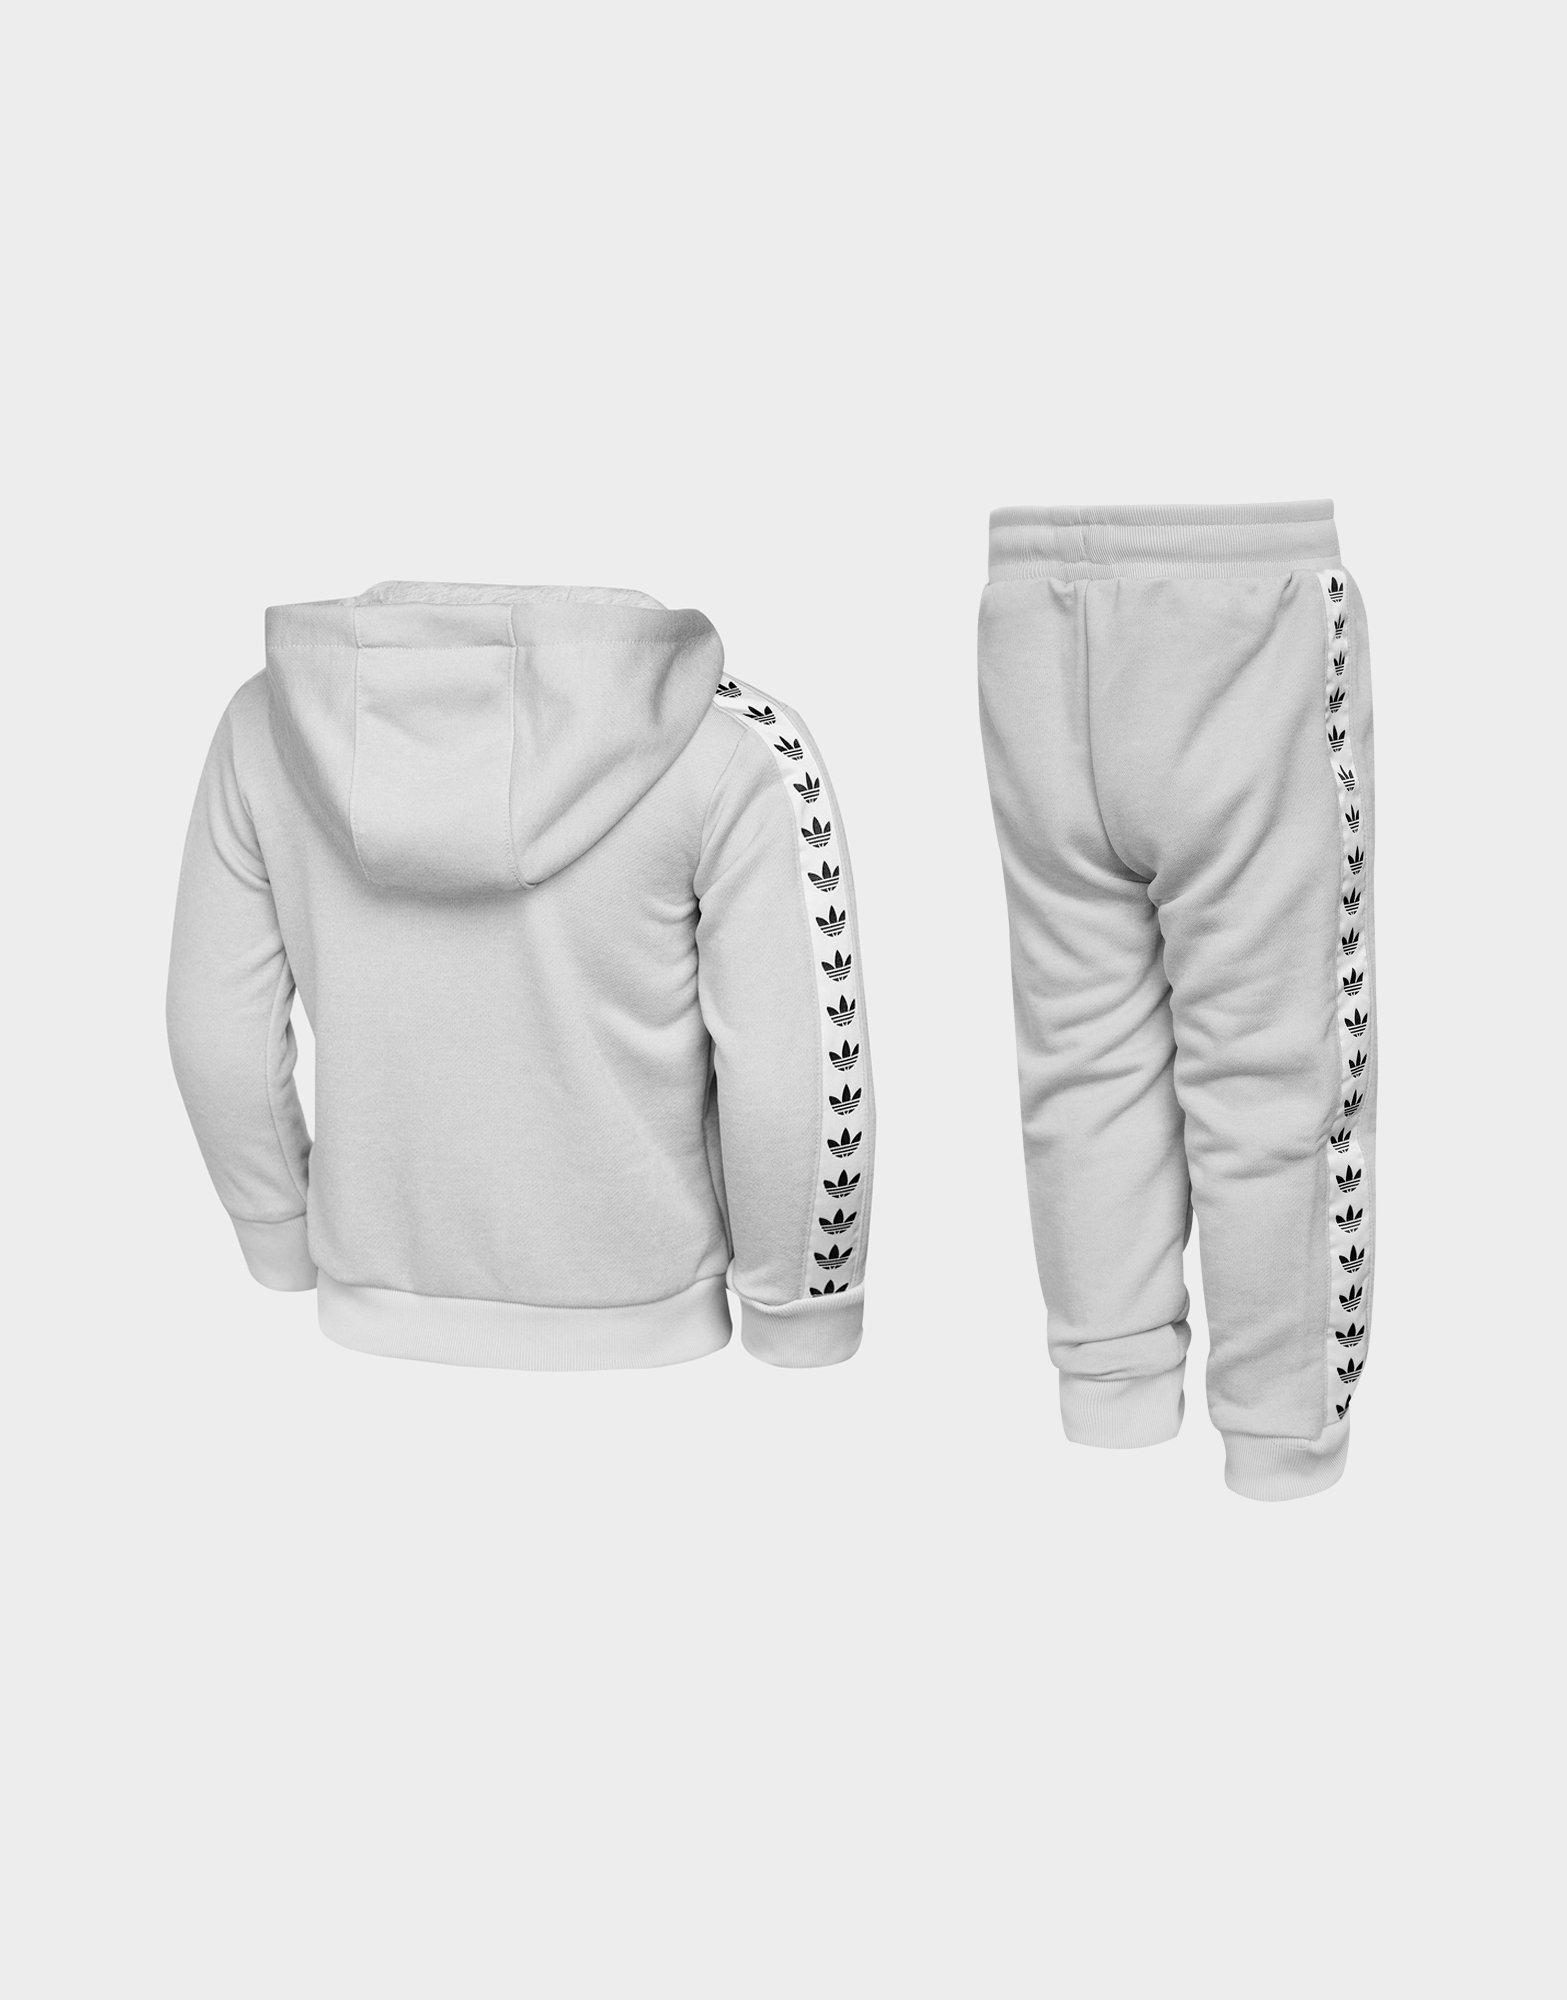 grey and white adidas tracksuit